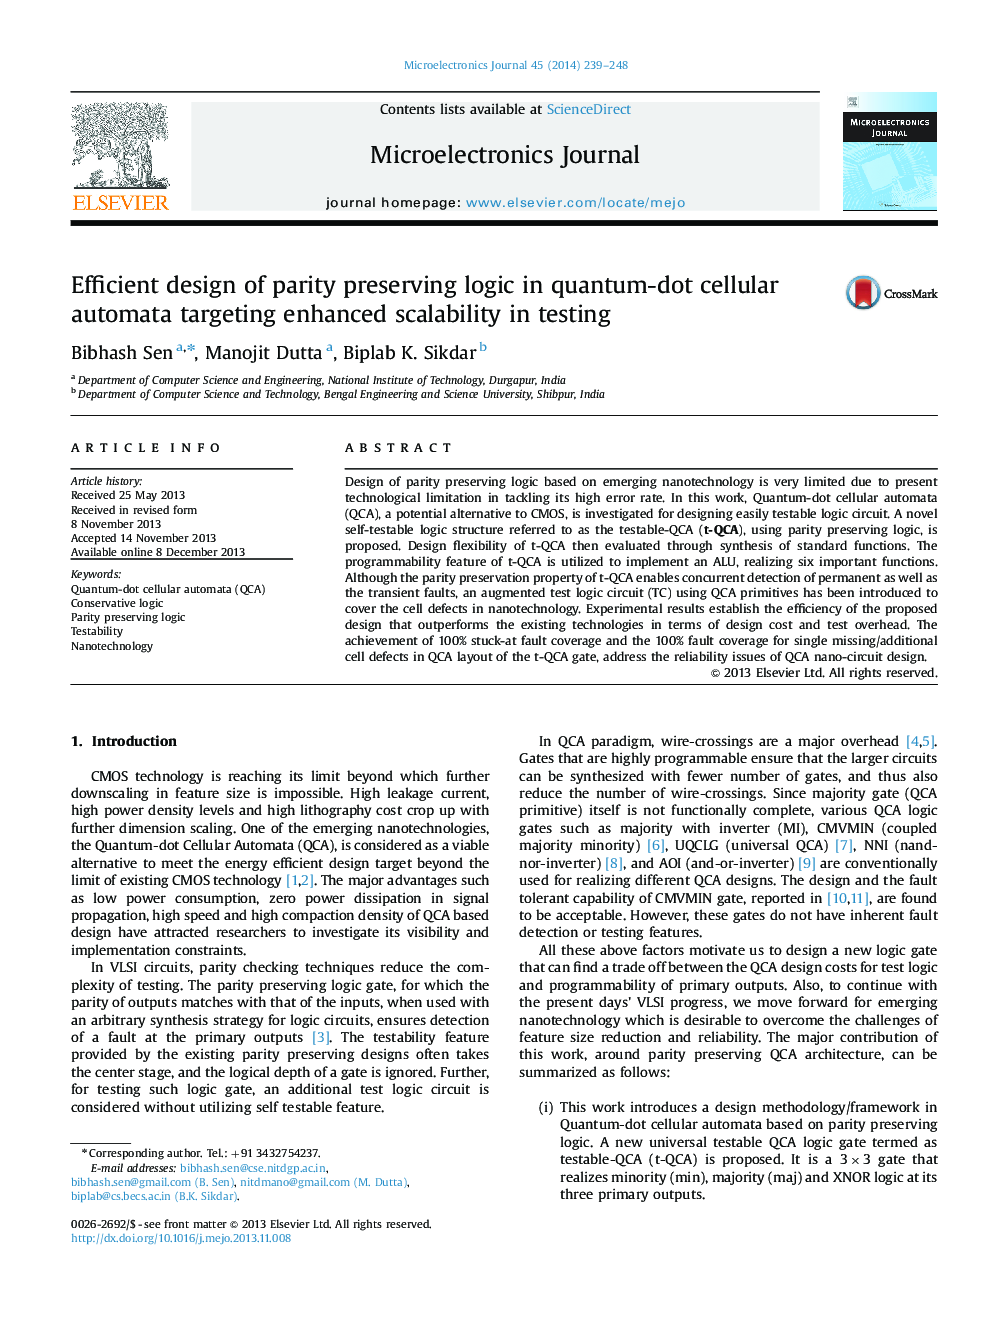 Efficient design of parity preserving logic in quantum-dot cellular automata targeting enhanced scalability in testing